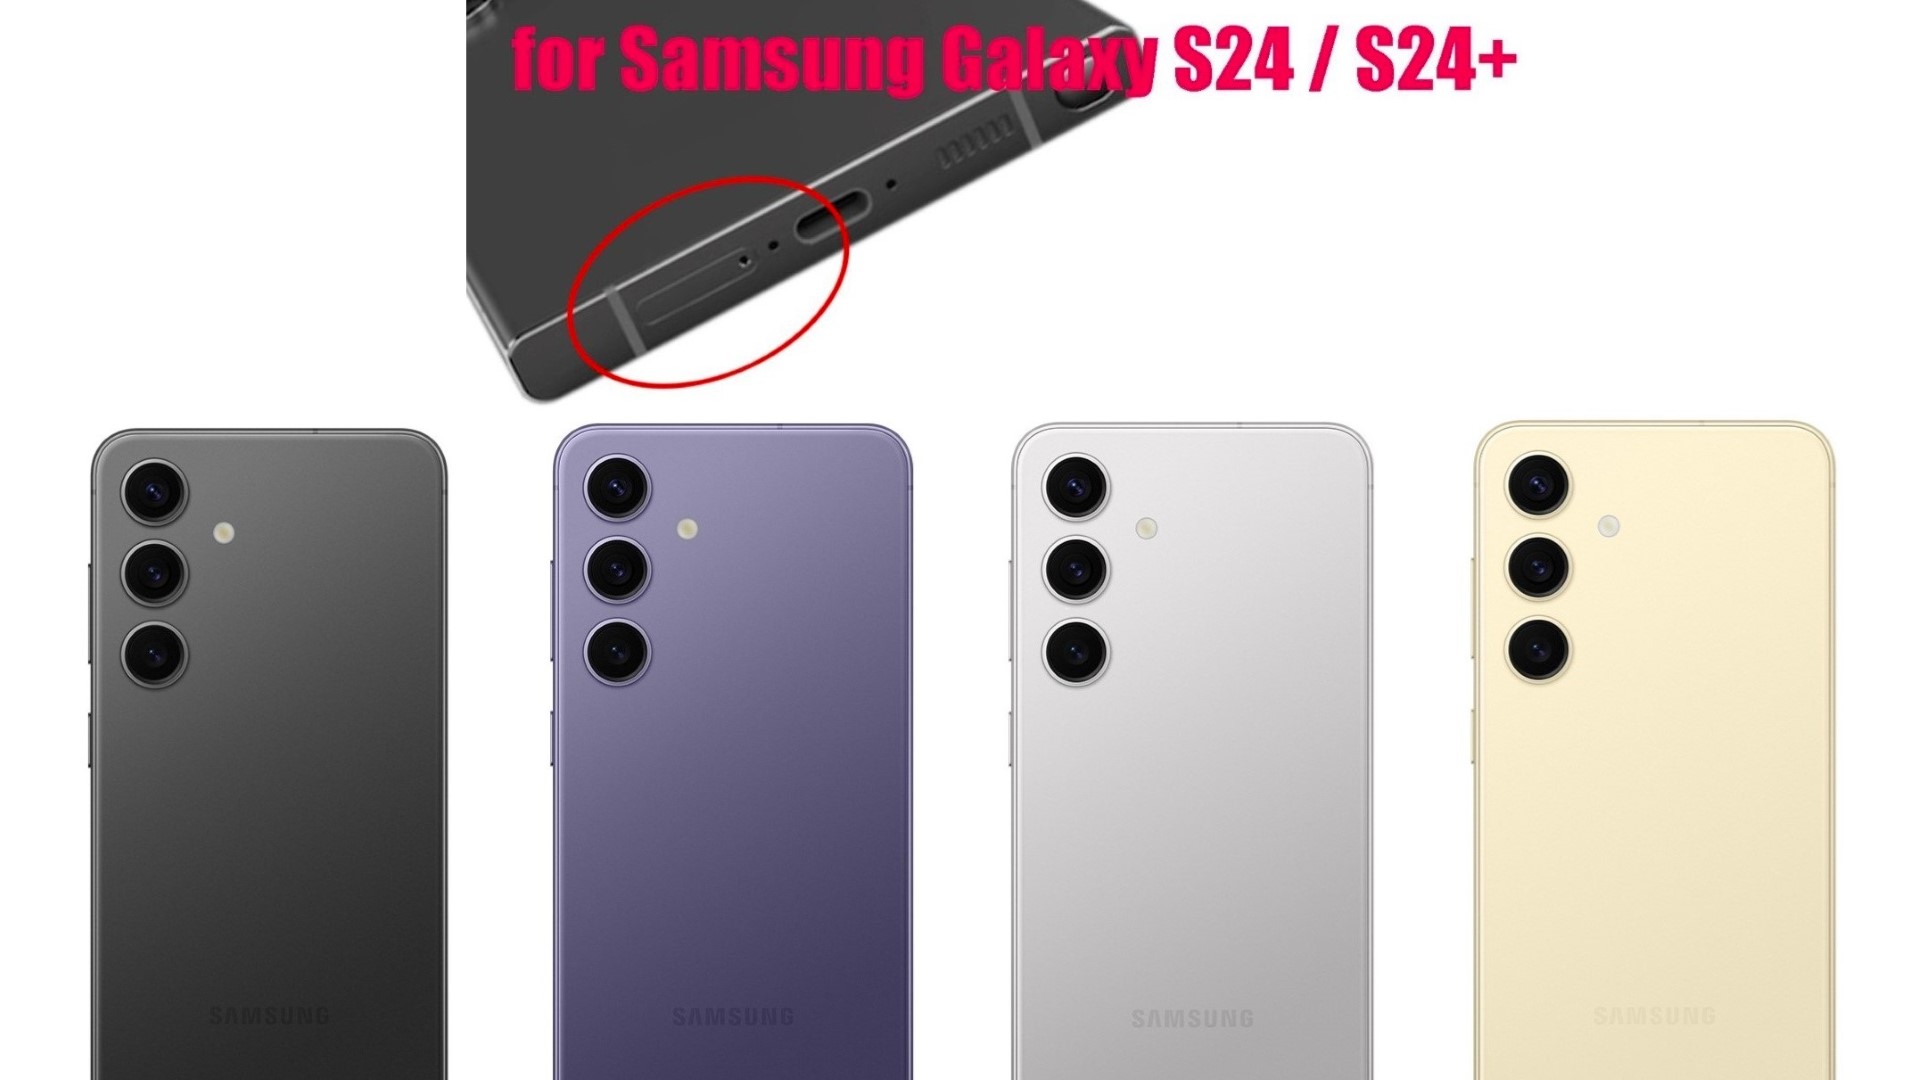 Samsung Galaxy S24 and S24+: online shop hints at three additional “exclusive” color options